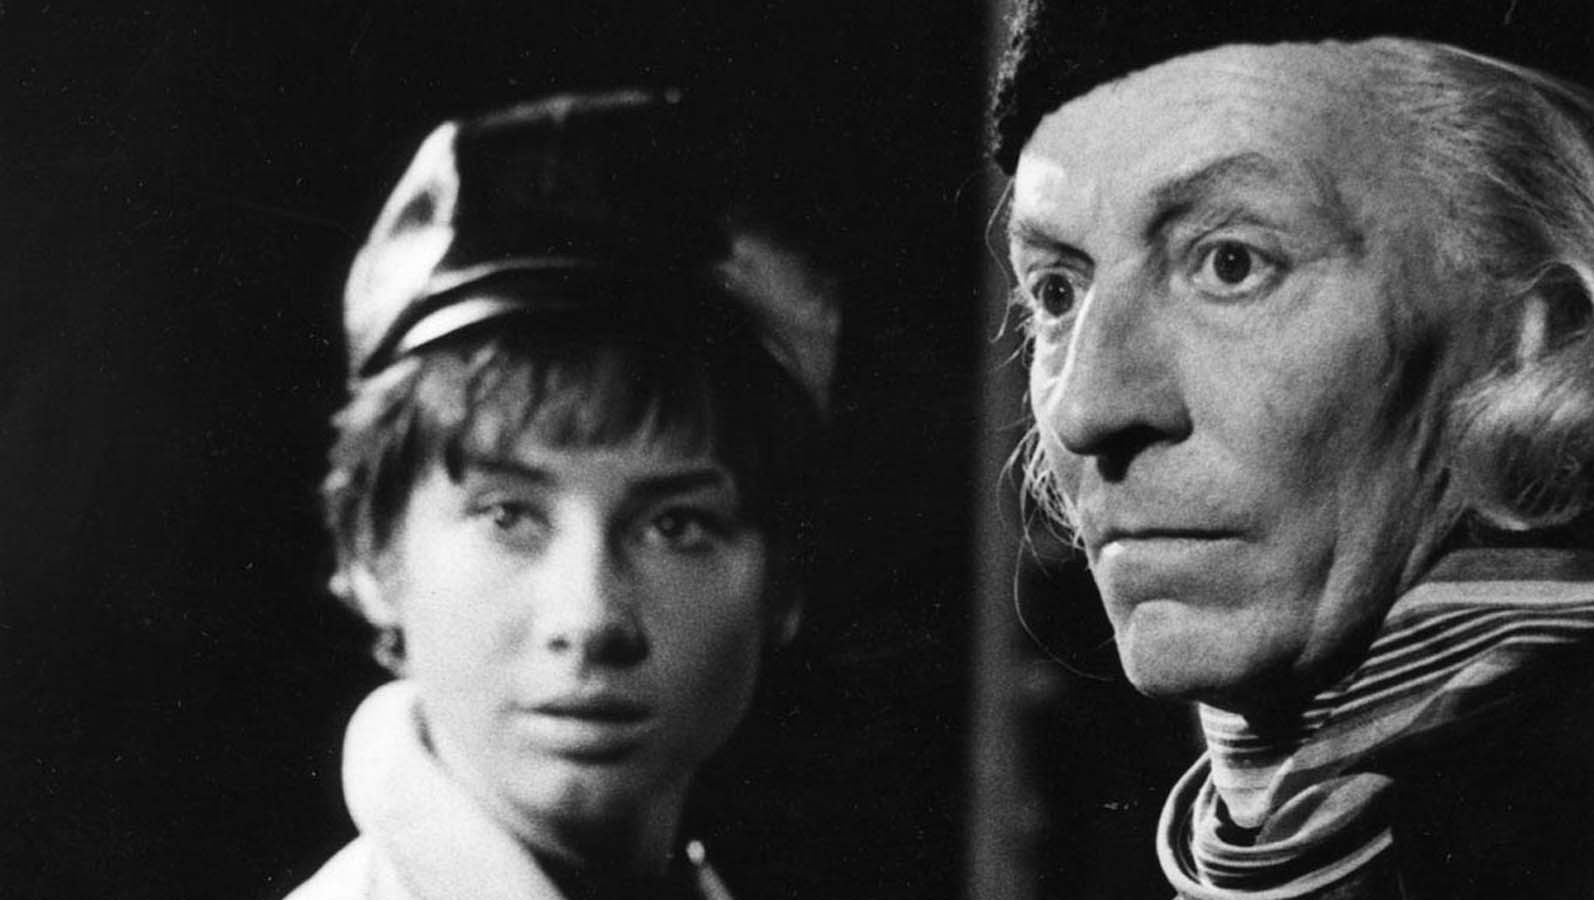 People 1594x900 Doctor Who William Hartnell TV series monochrome science fiction